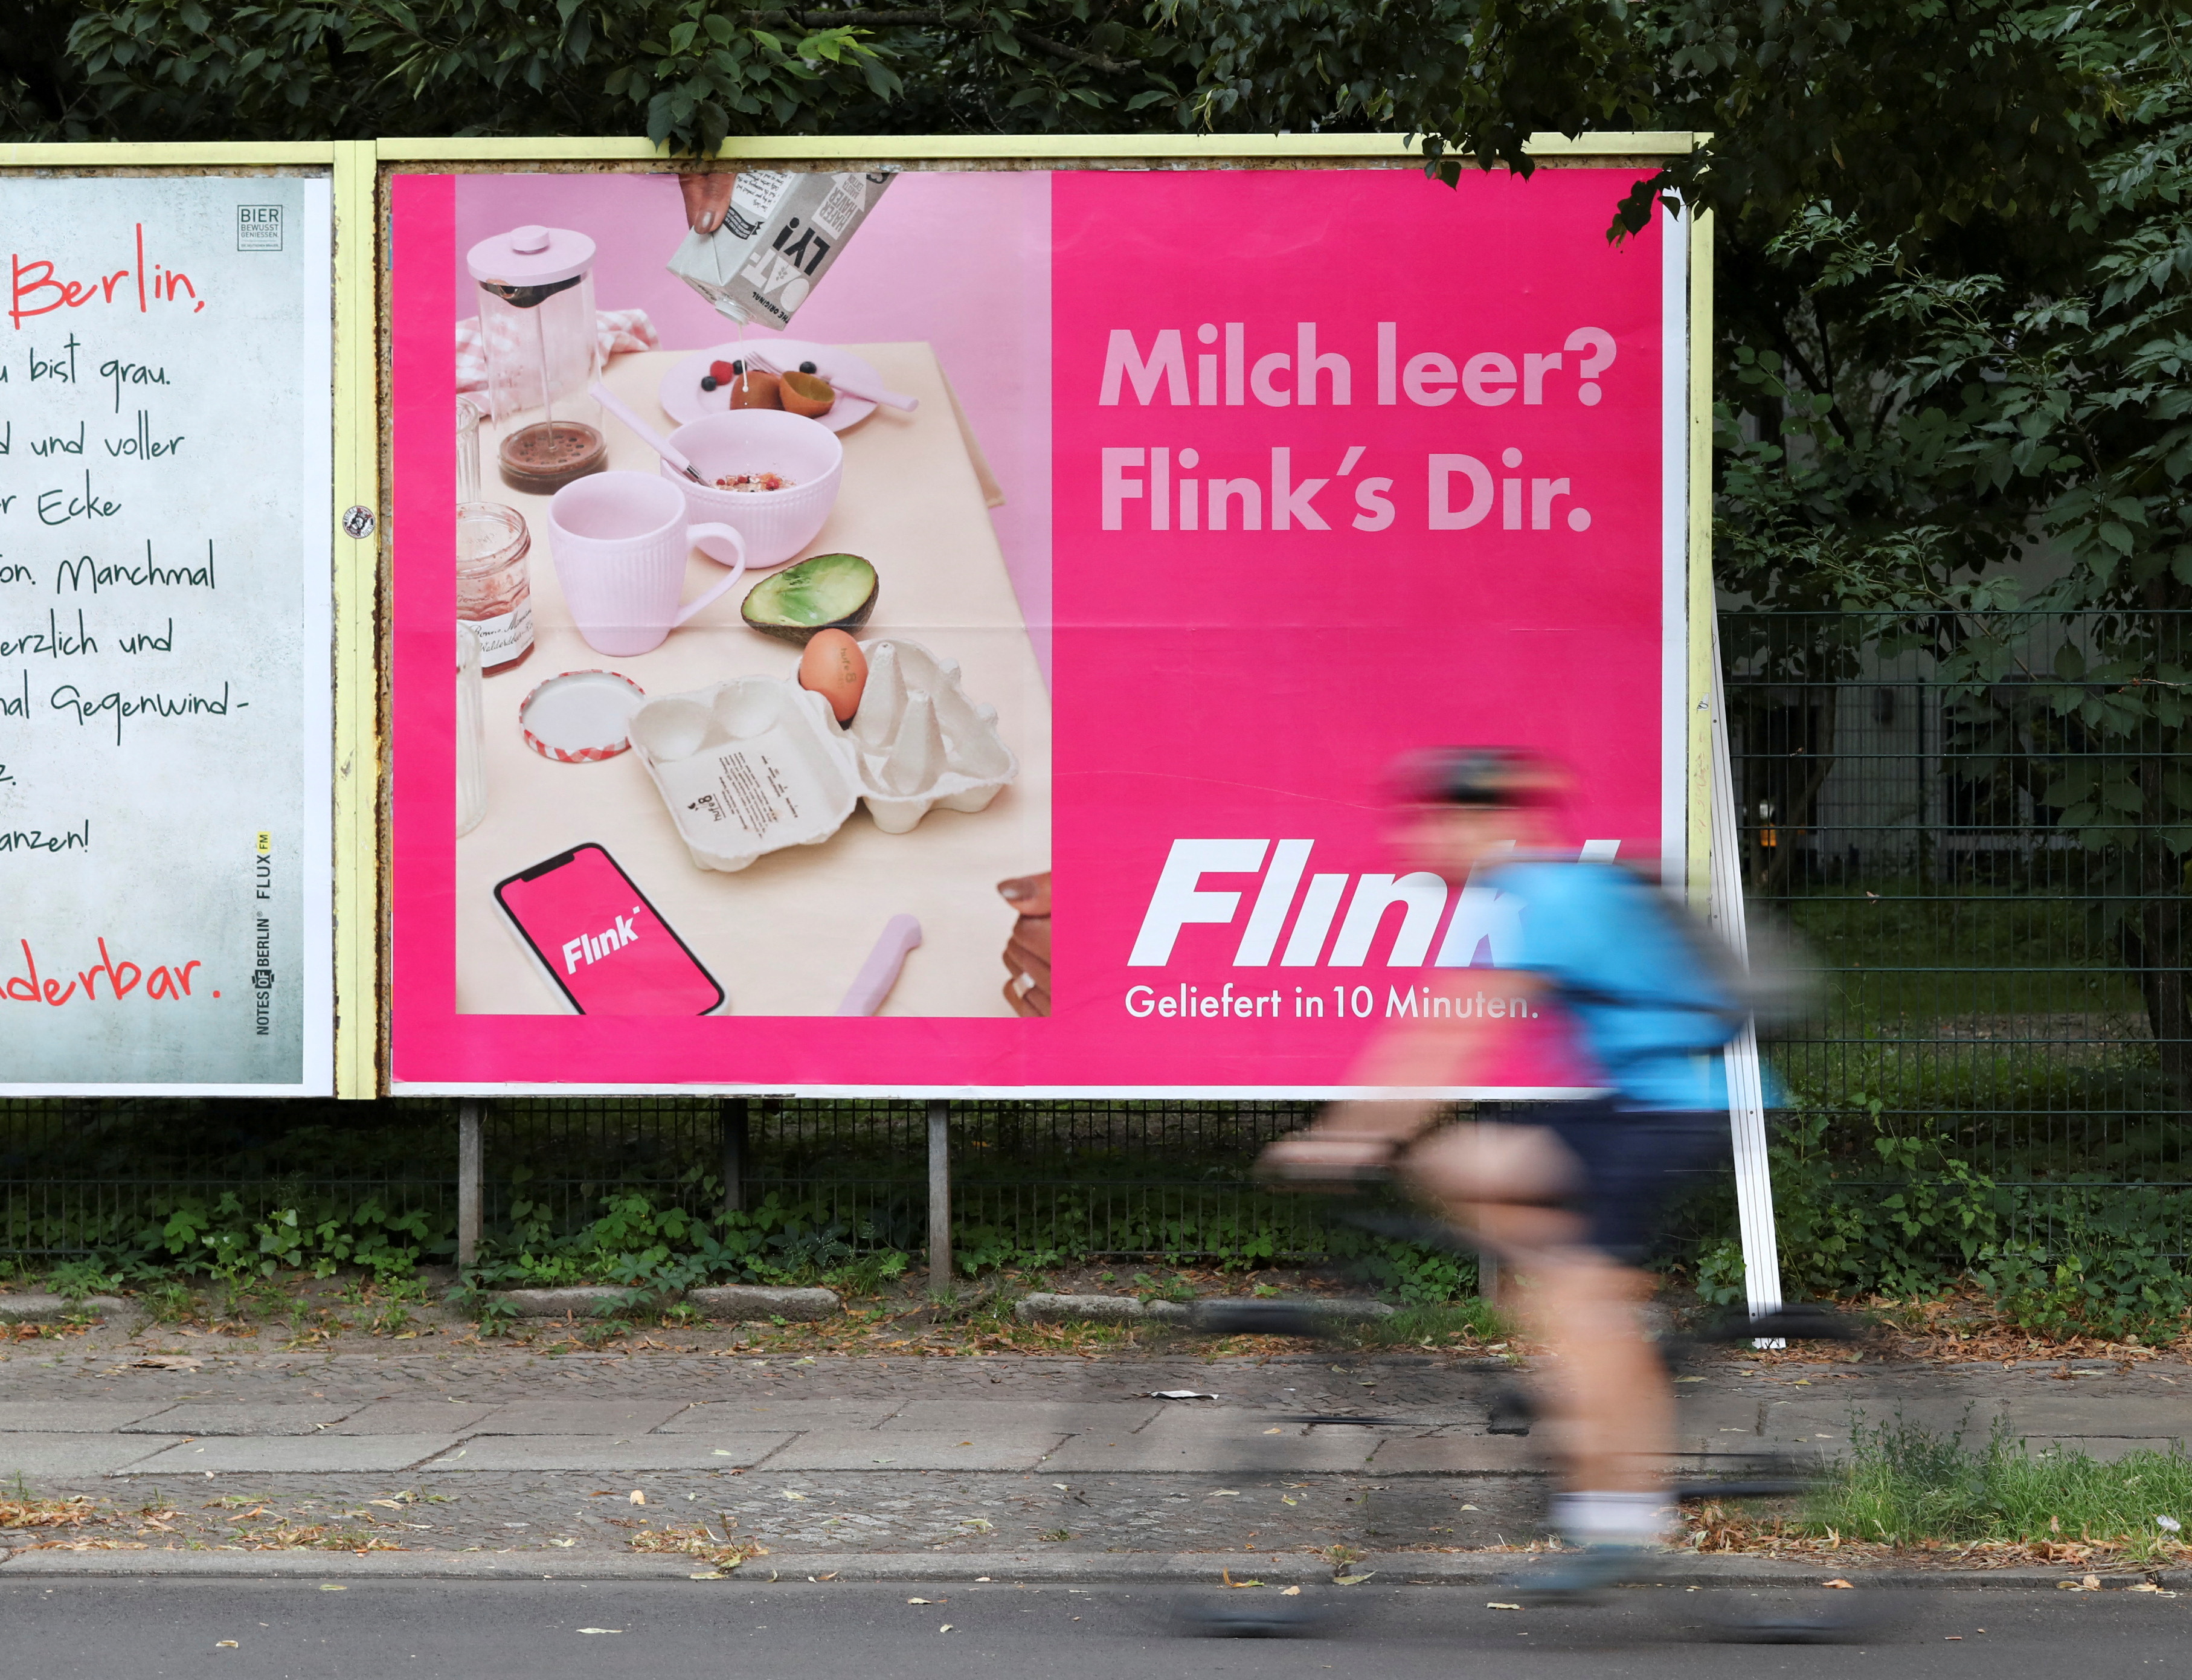 Advertisements promoting delivery services in Berlin